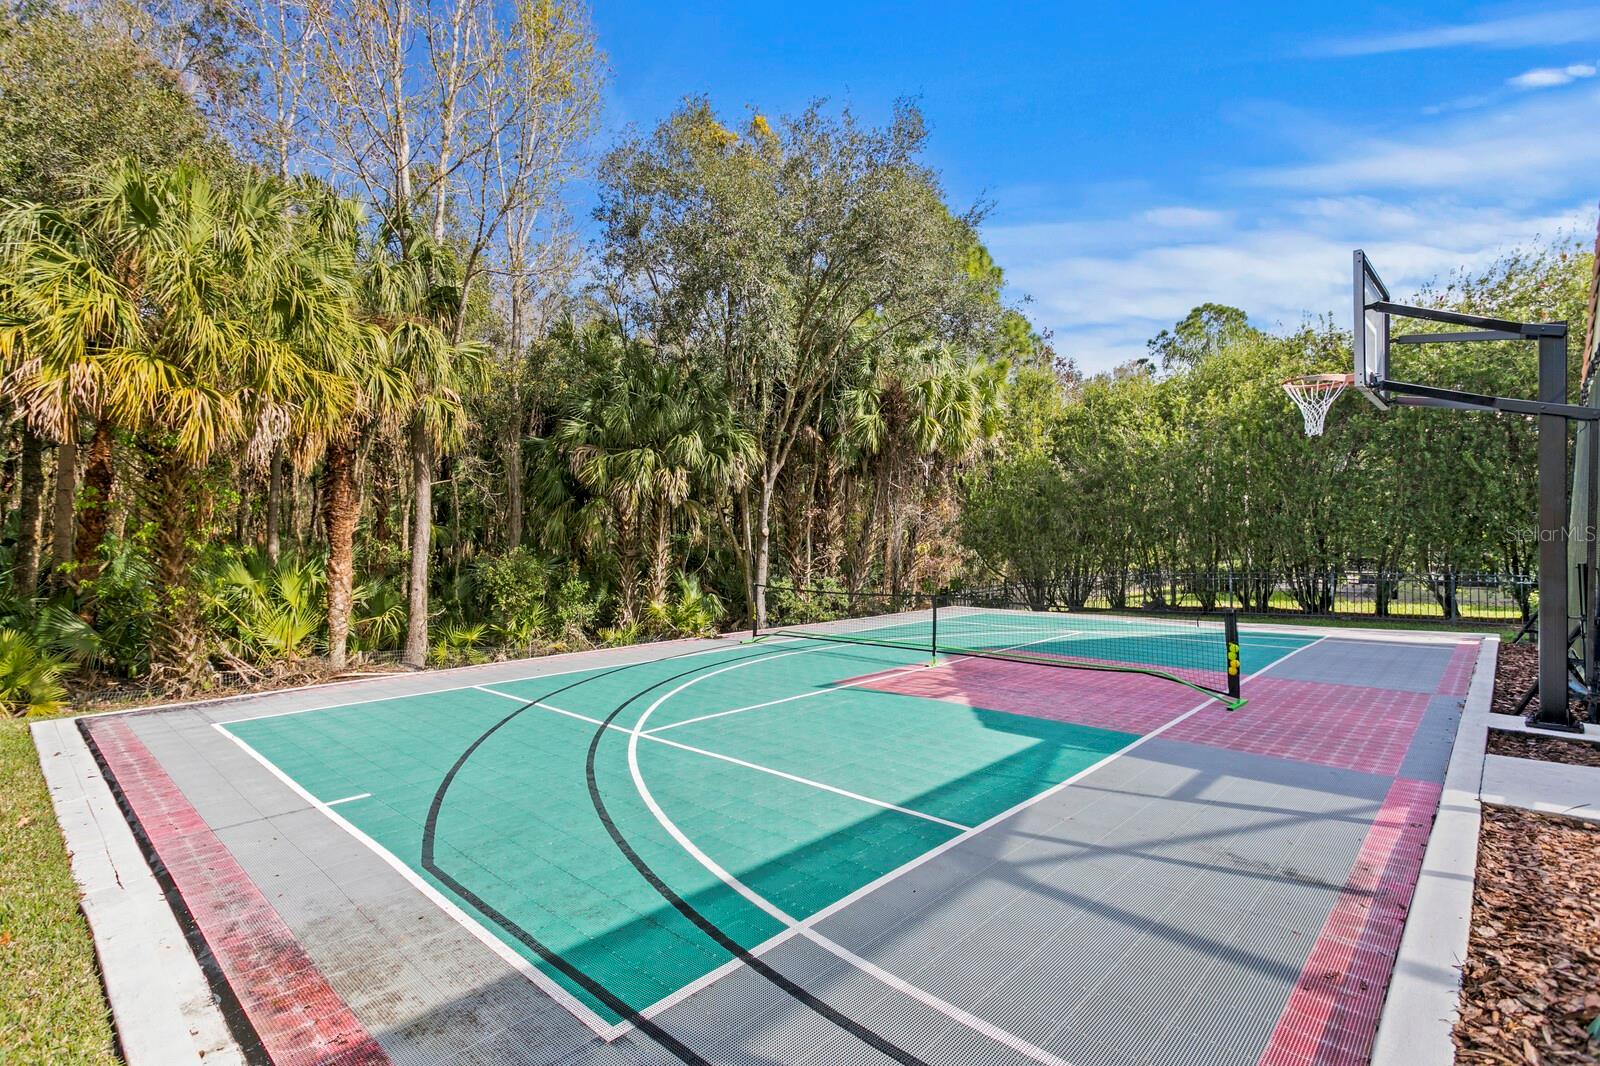 Sports Court may be used as pickle ball court